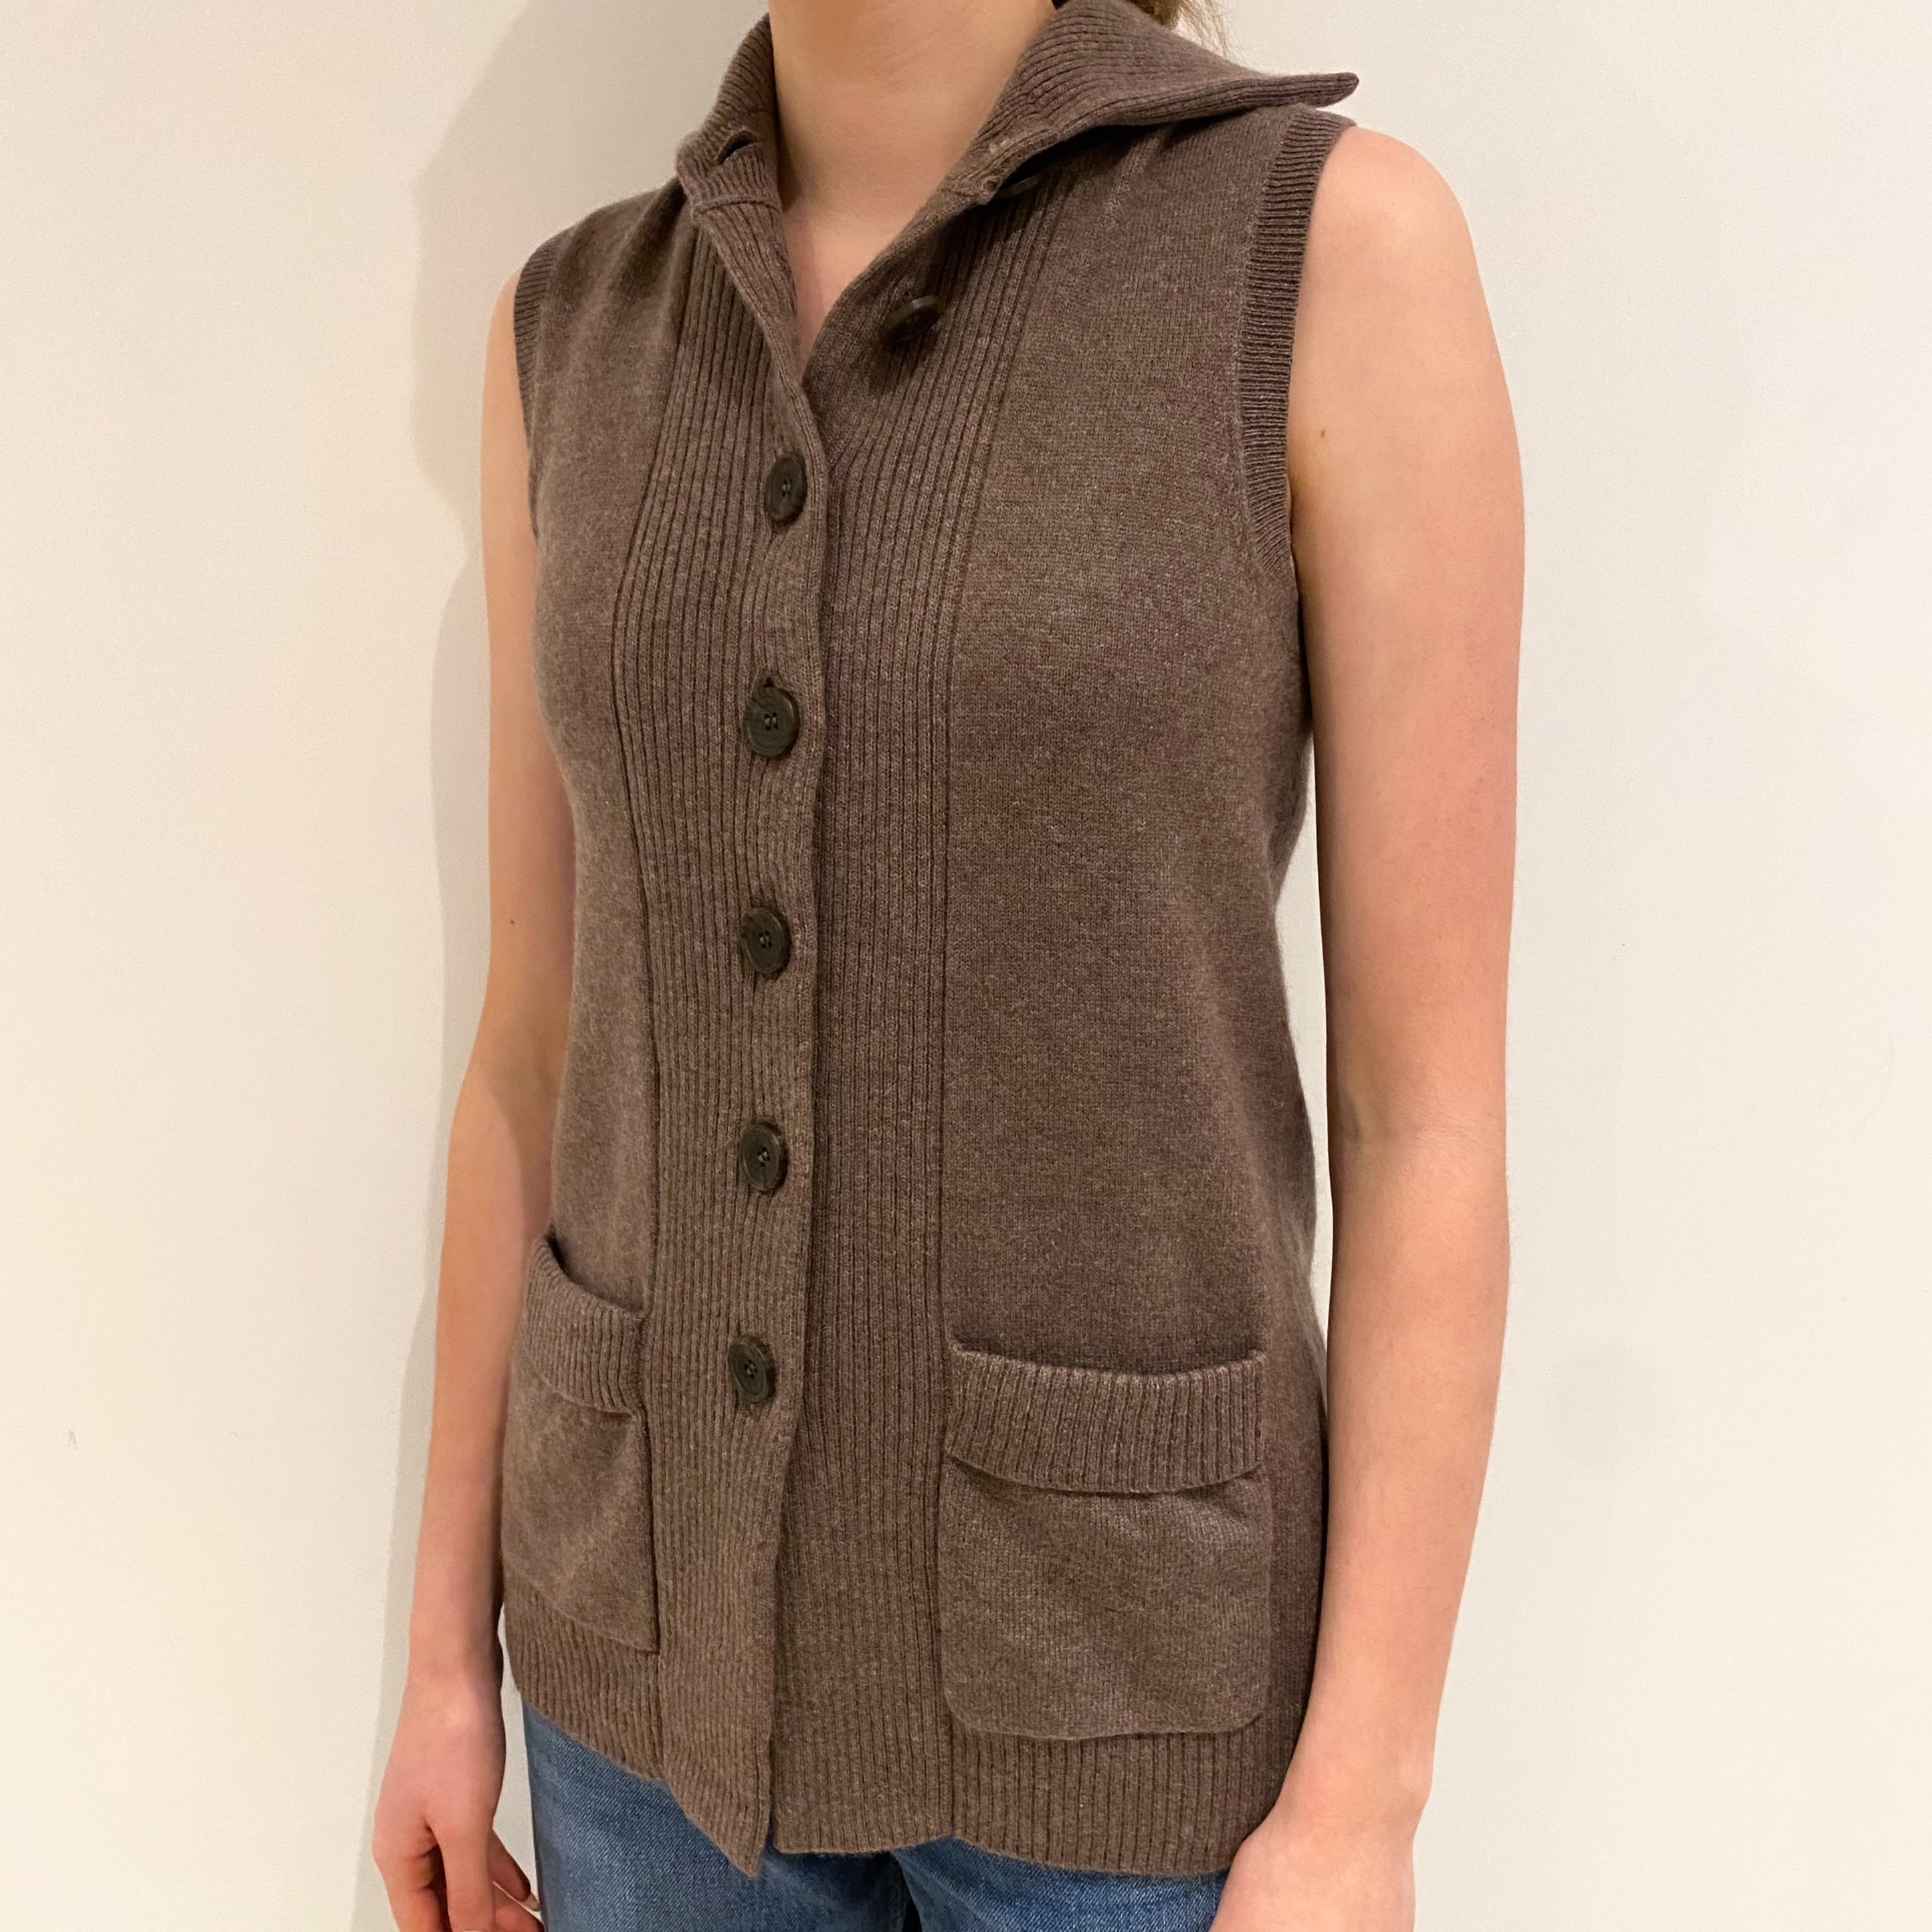 Mocha Brown Cashmere Collared Gilet with Pockets Extra Small